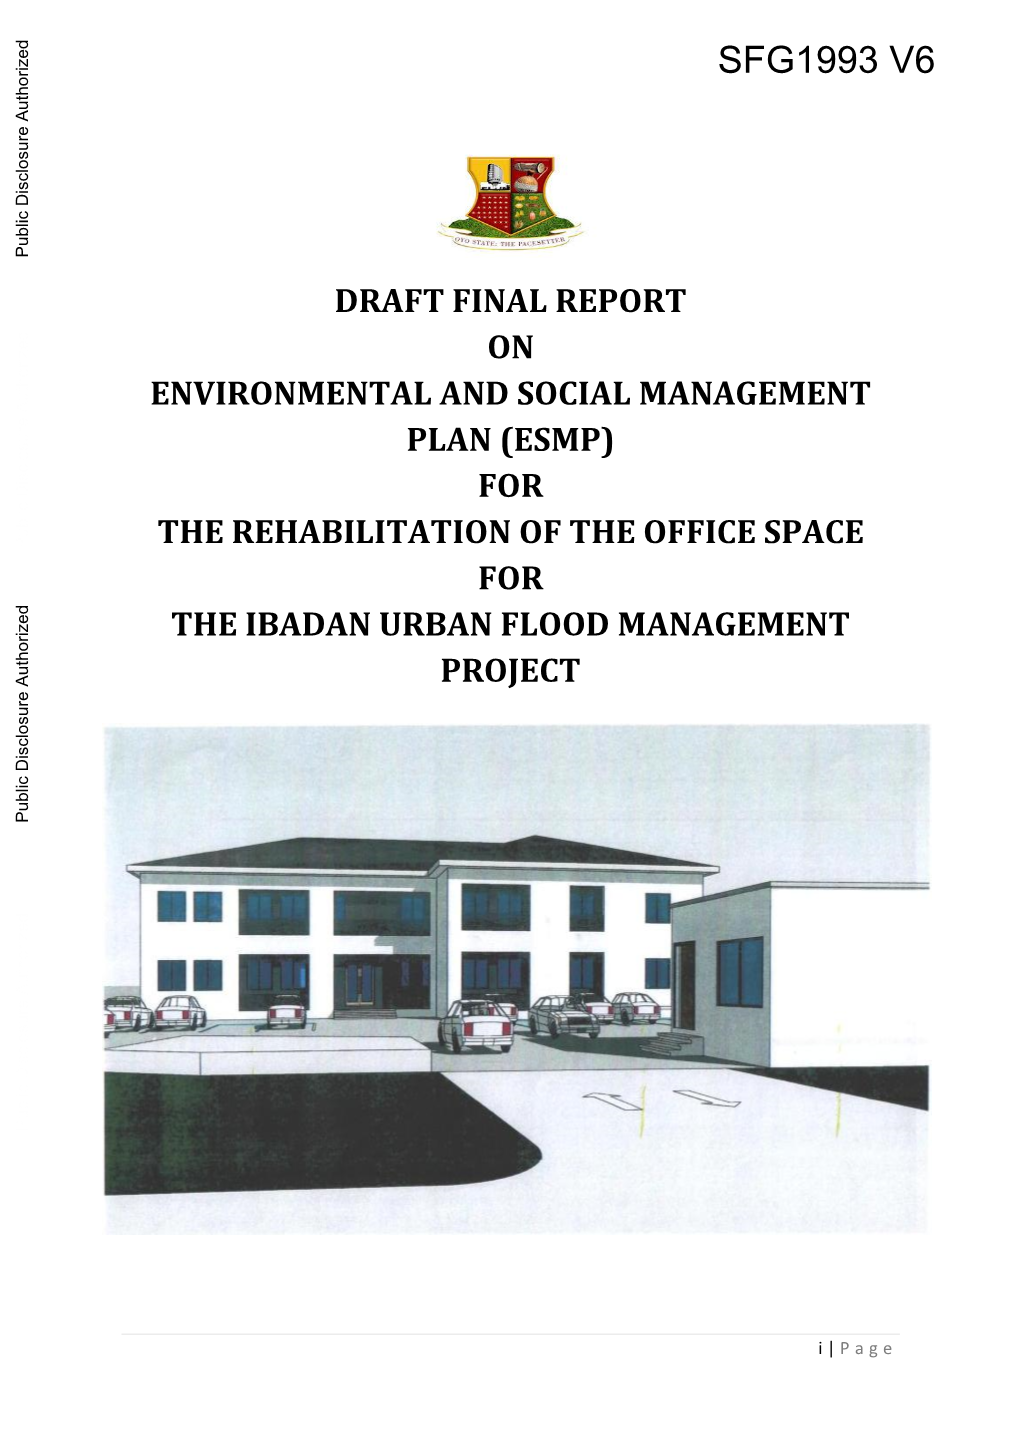 (Esmp) for the Rehabilitation of the Office